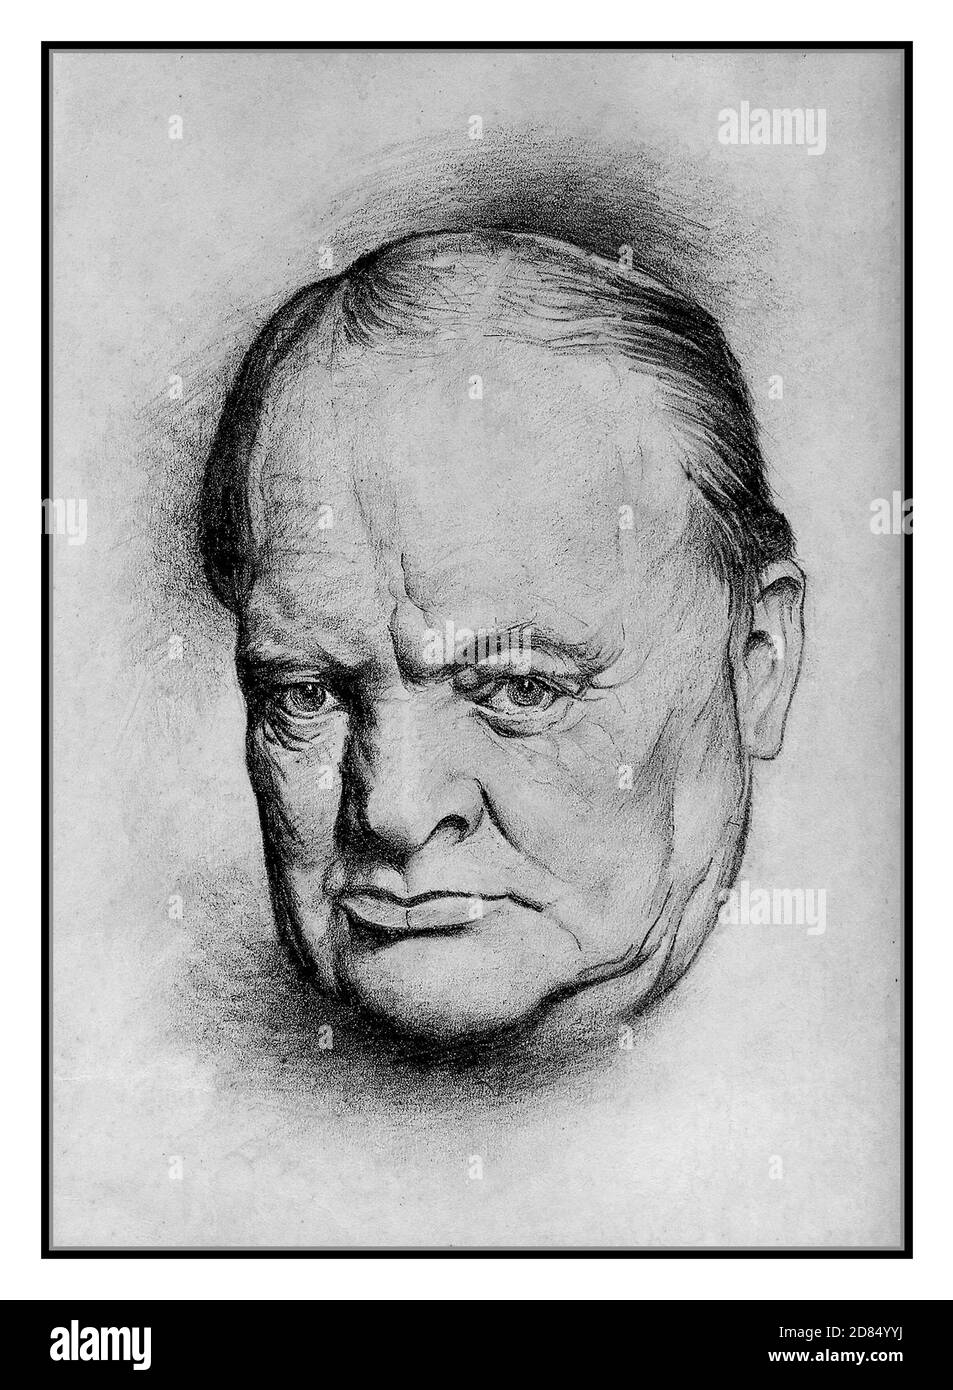 Archive WW2 Winston Churchill Wartime inspirational leader and Prime Minister World War II  Portrait Head & Shoulders B&W  Drawing by Lyn Ott in 1942. of  British wartime Prime Minister Churchill Lyn Ott (1926-1998) was an American painter. Stock Photo